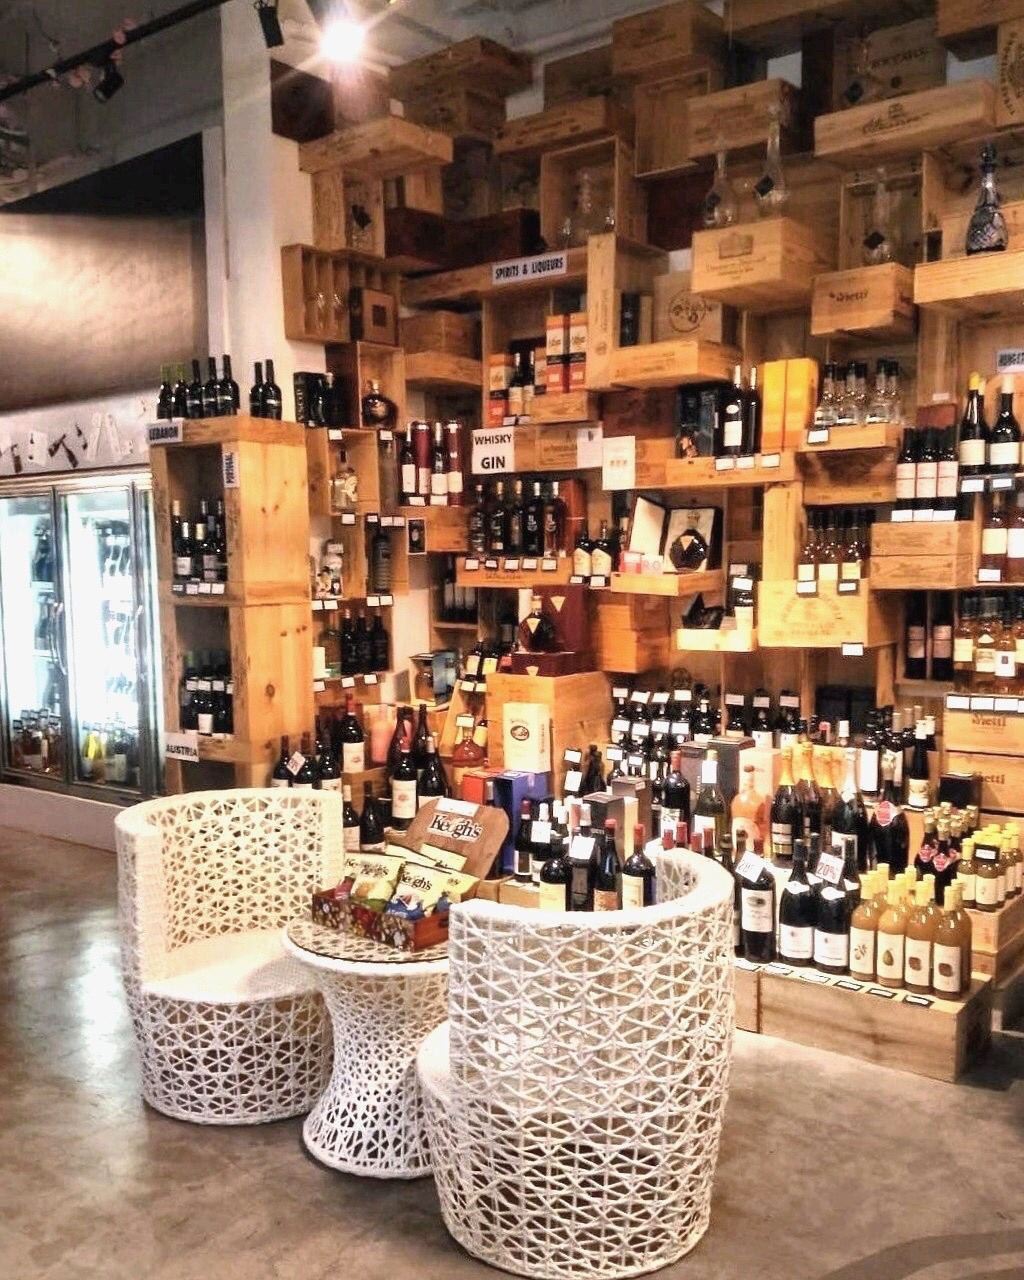 Straits Wine Singapore offers a wide selection of wines